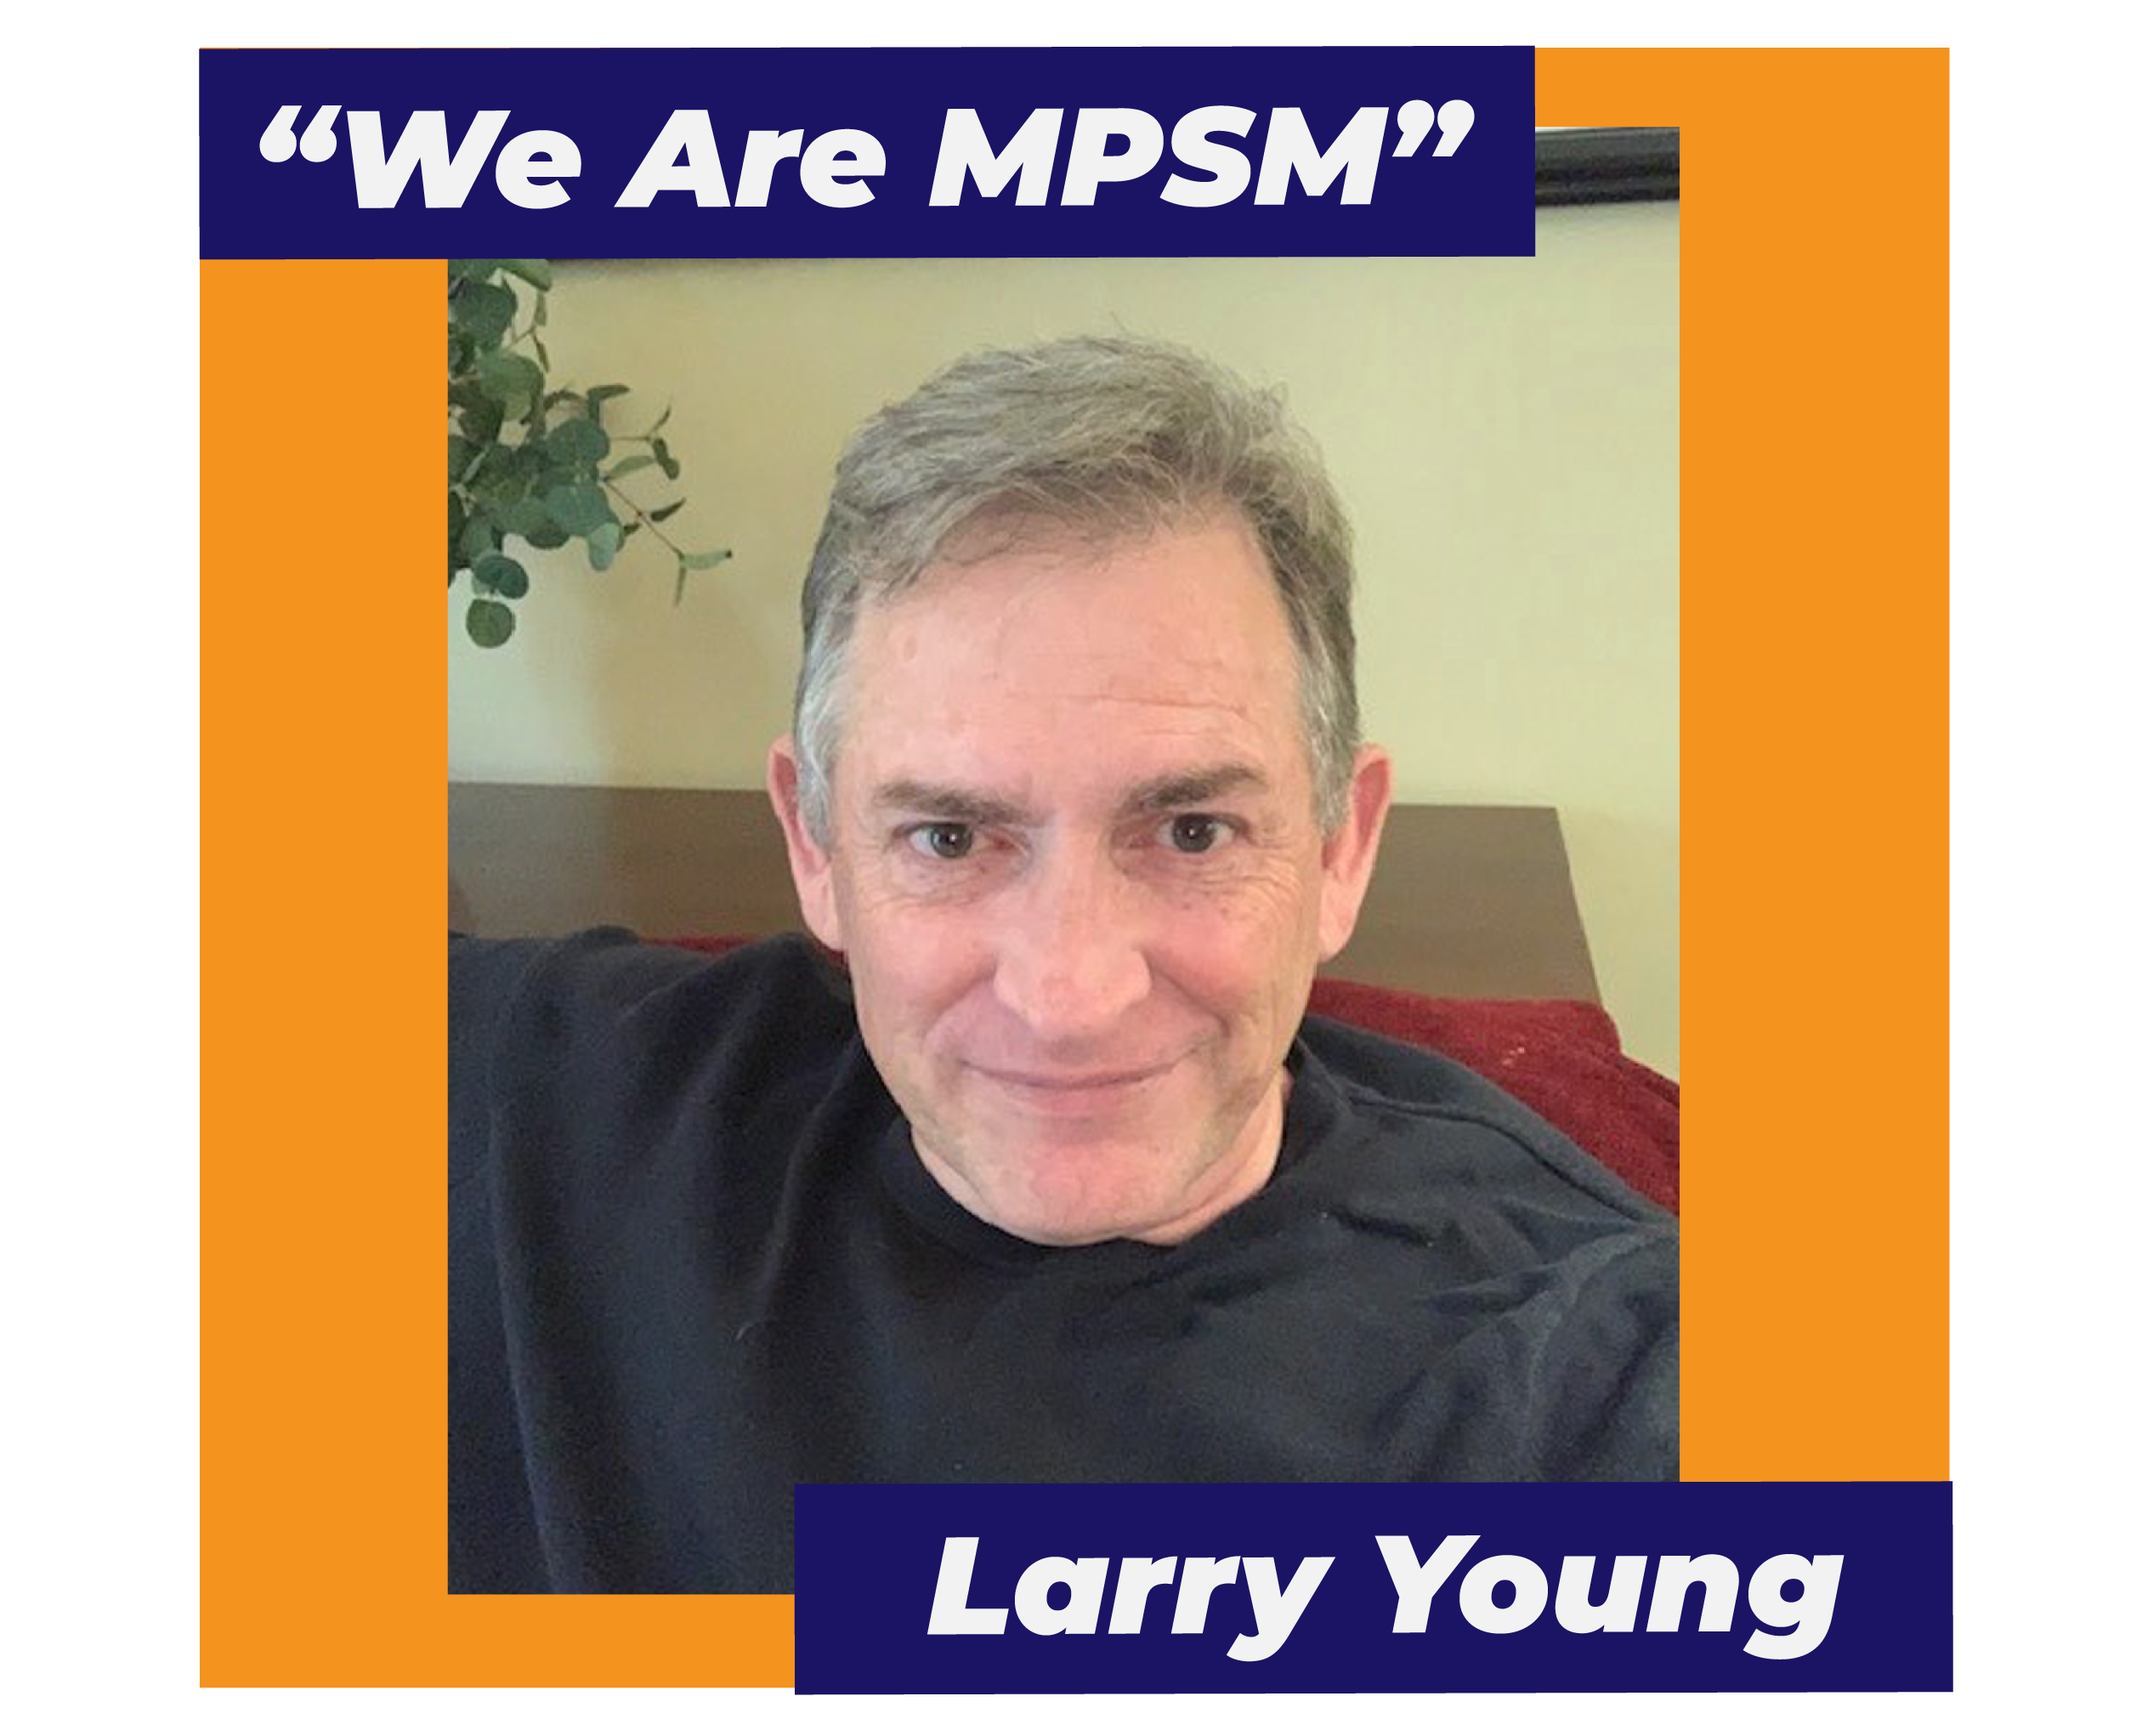 "We Are MSPM" photo of Larry Young